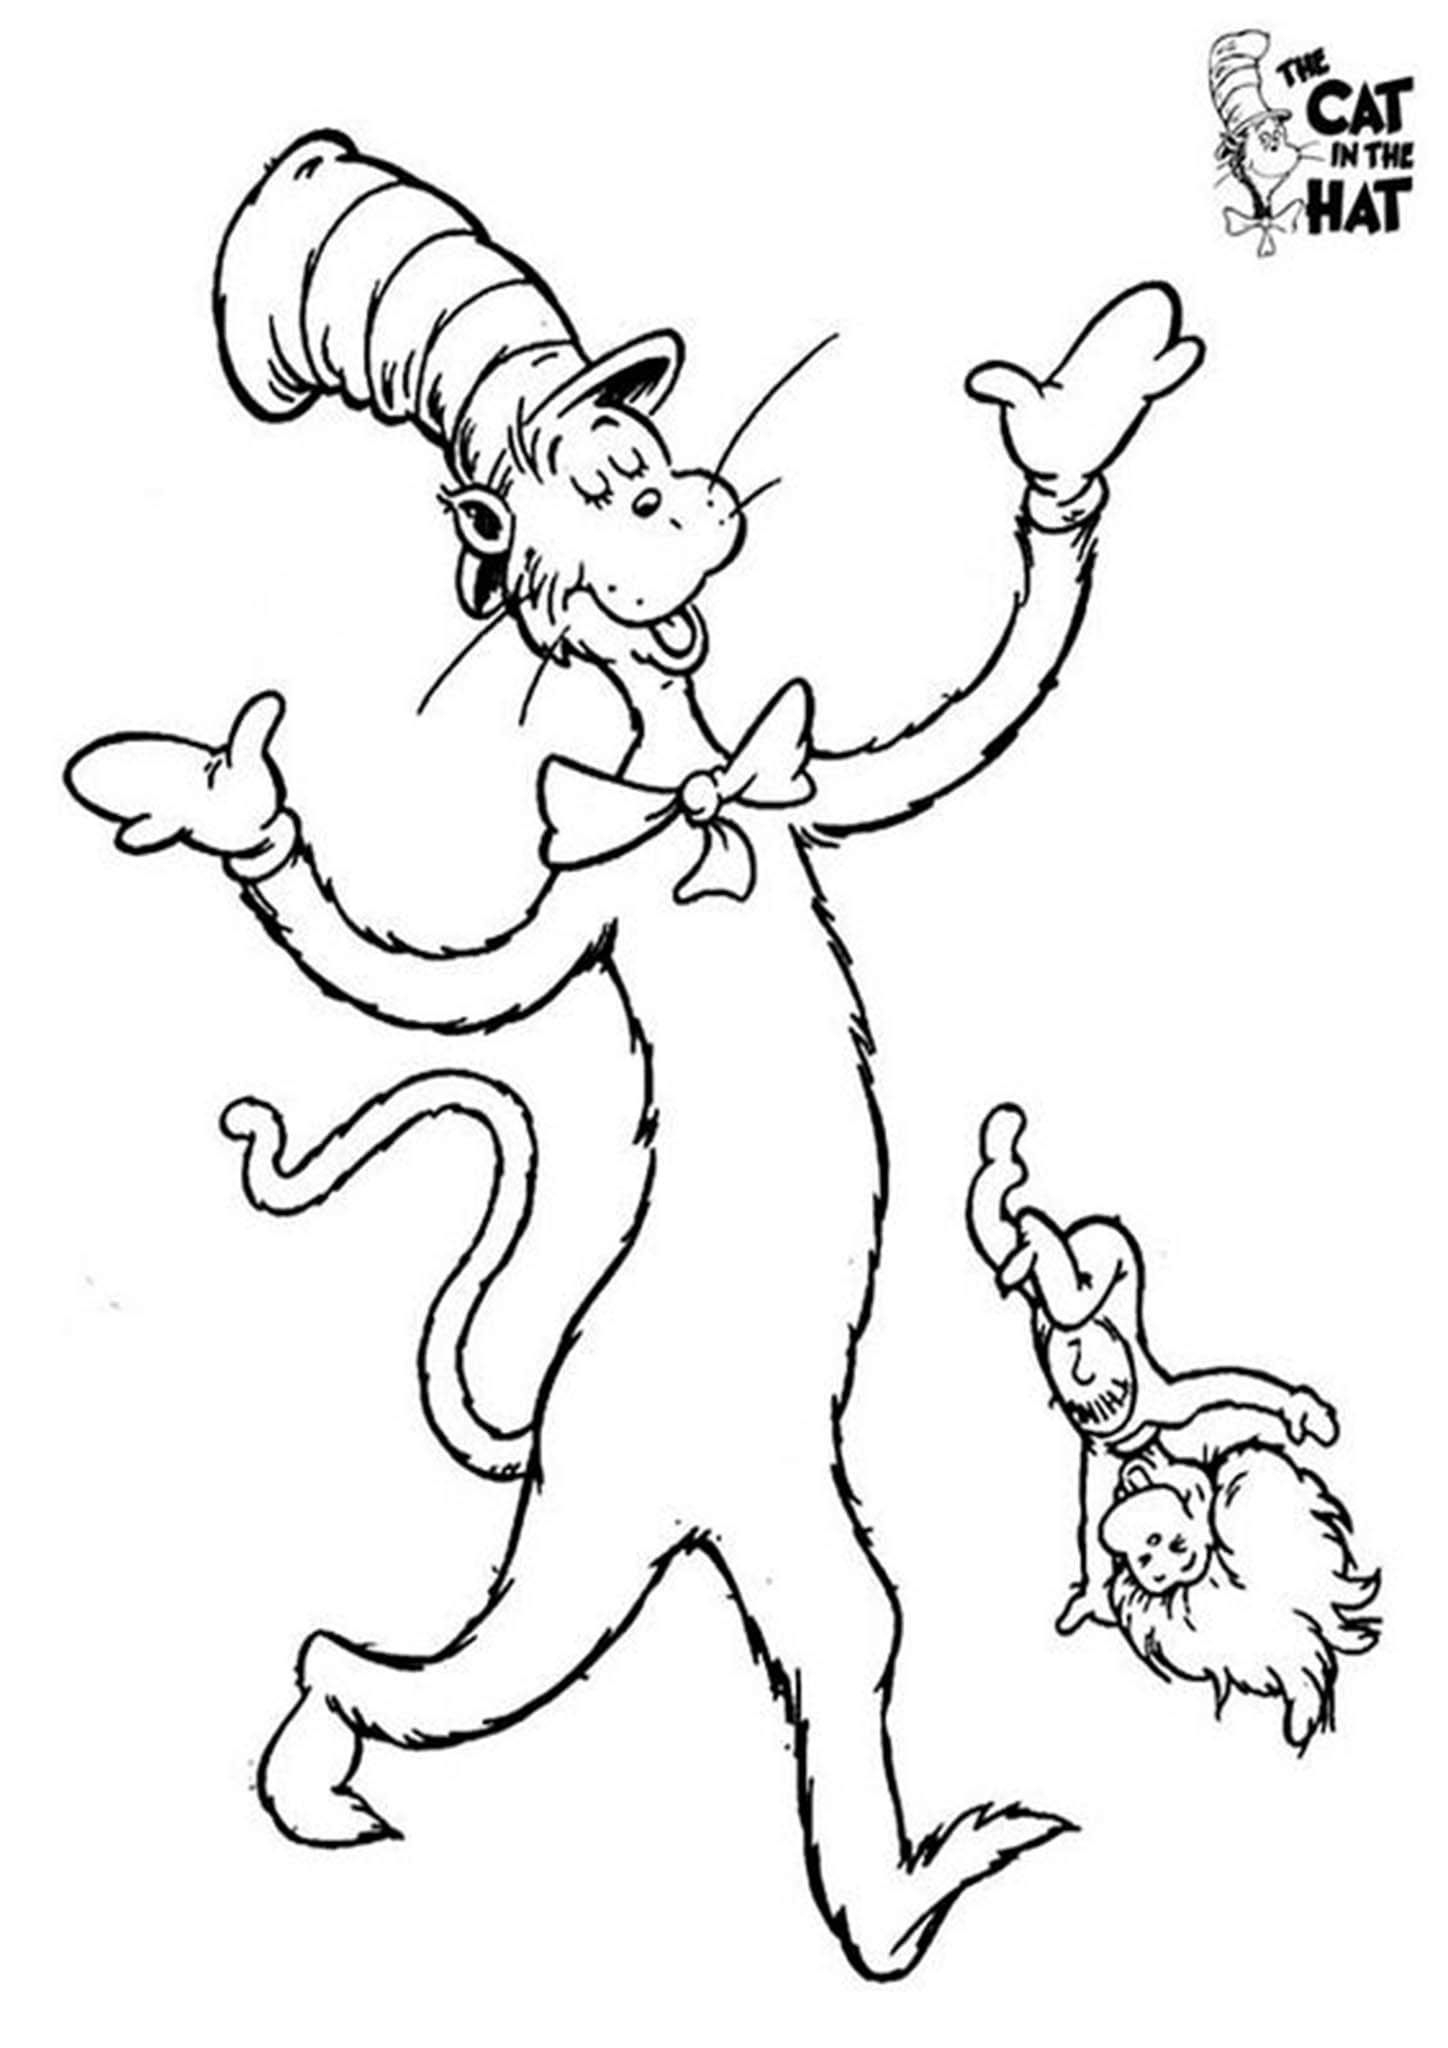 Free Easy To Print Cat In The Hat Coloring Pages Dr Seuss Coloring Pages Dr Seuss Coloring Sheet Cartoon Coloring Pages - Free Printable Cat In The Hat Clip Art